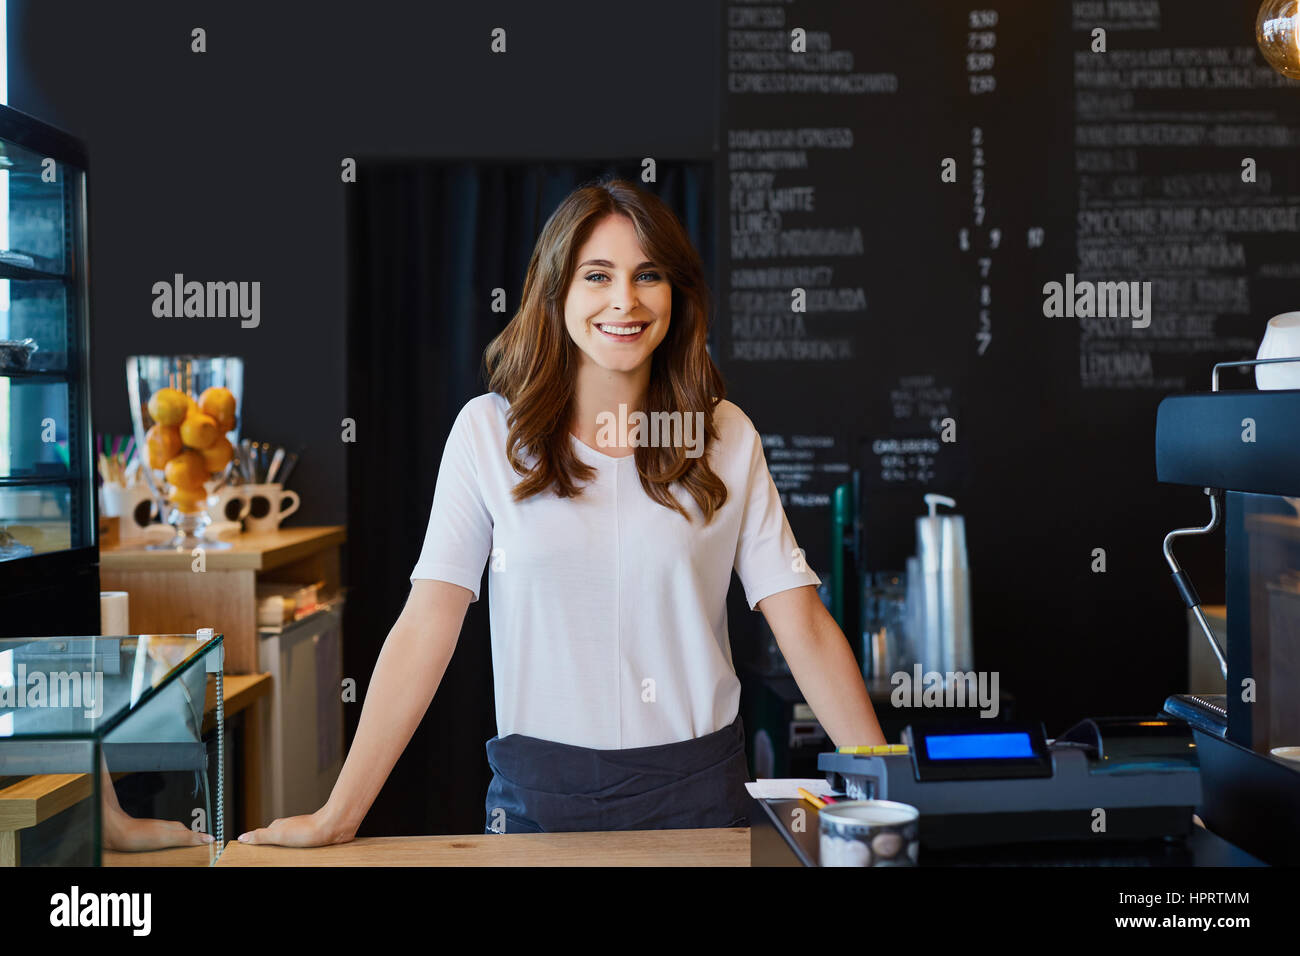 Beautiful female barista standing behind the bar in cafe Stock Photo